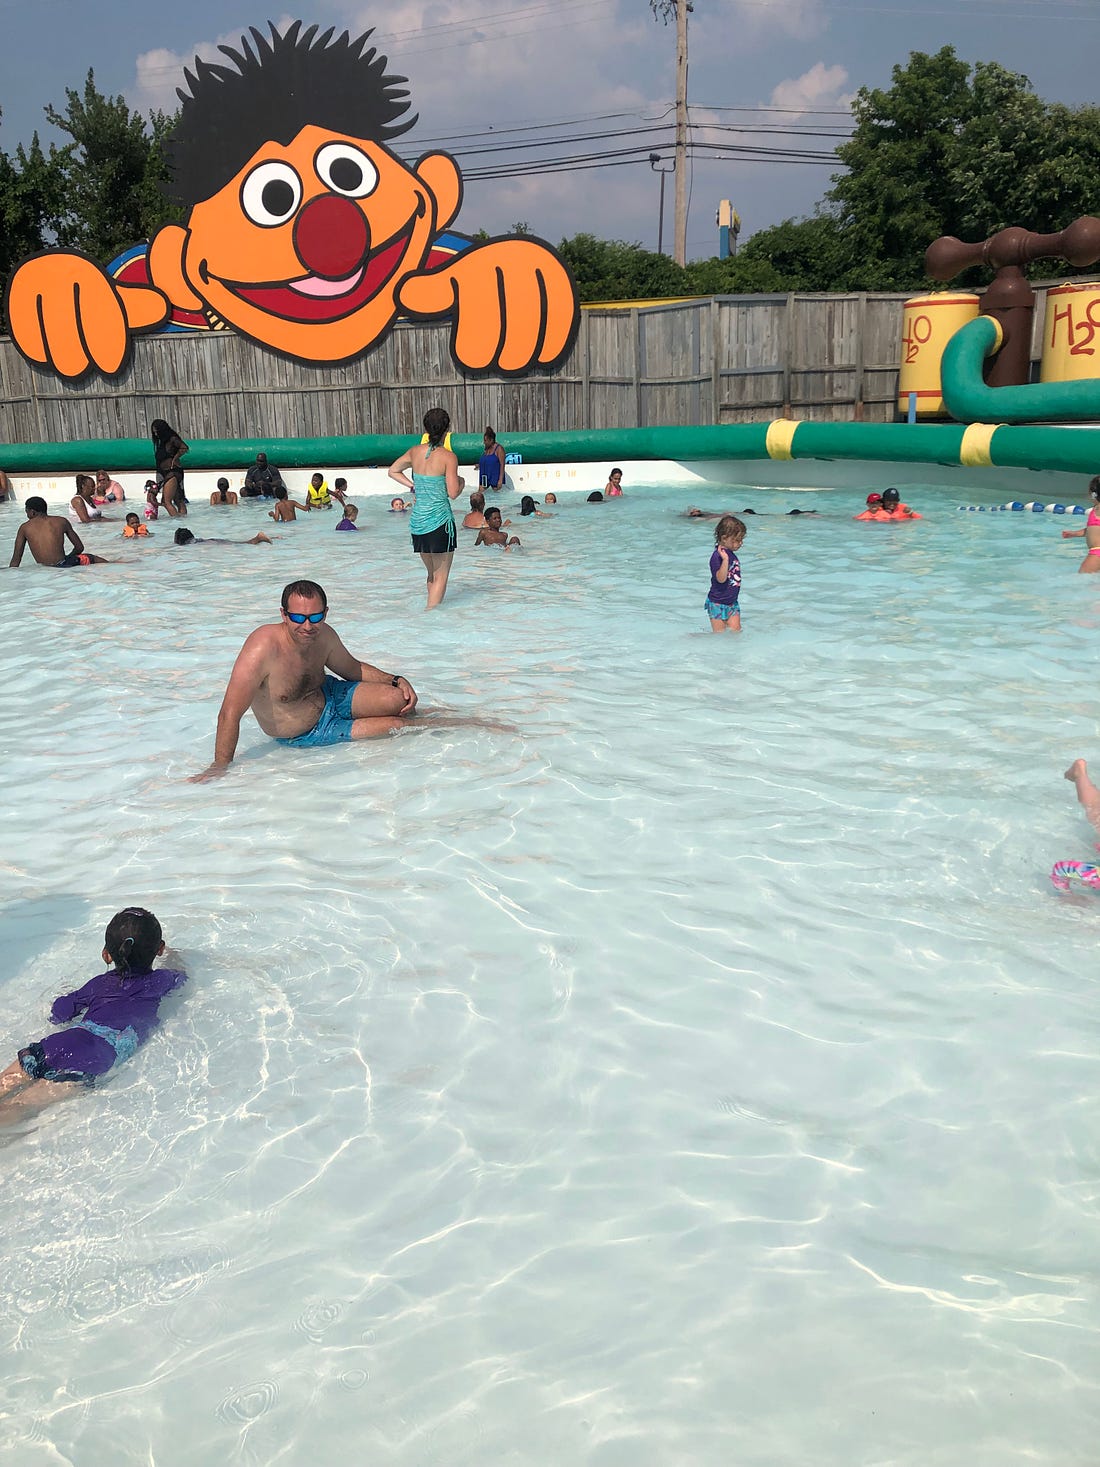 Photograph shows a wave pool with toddlers in it.